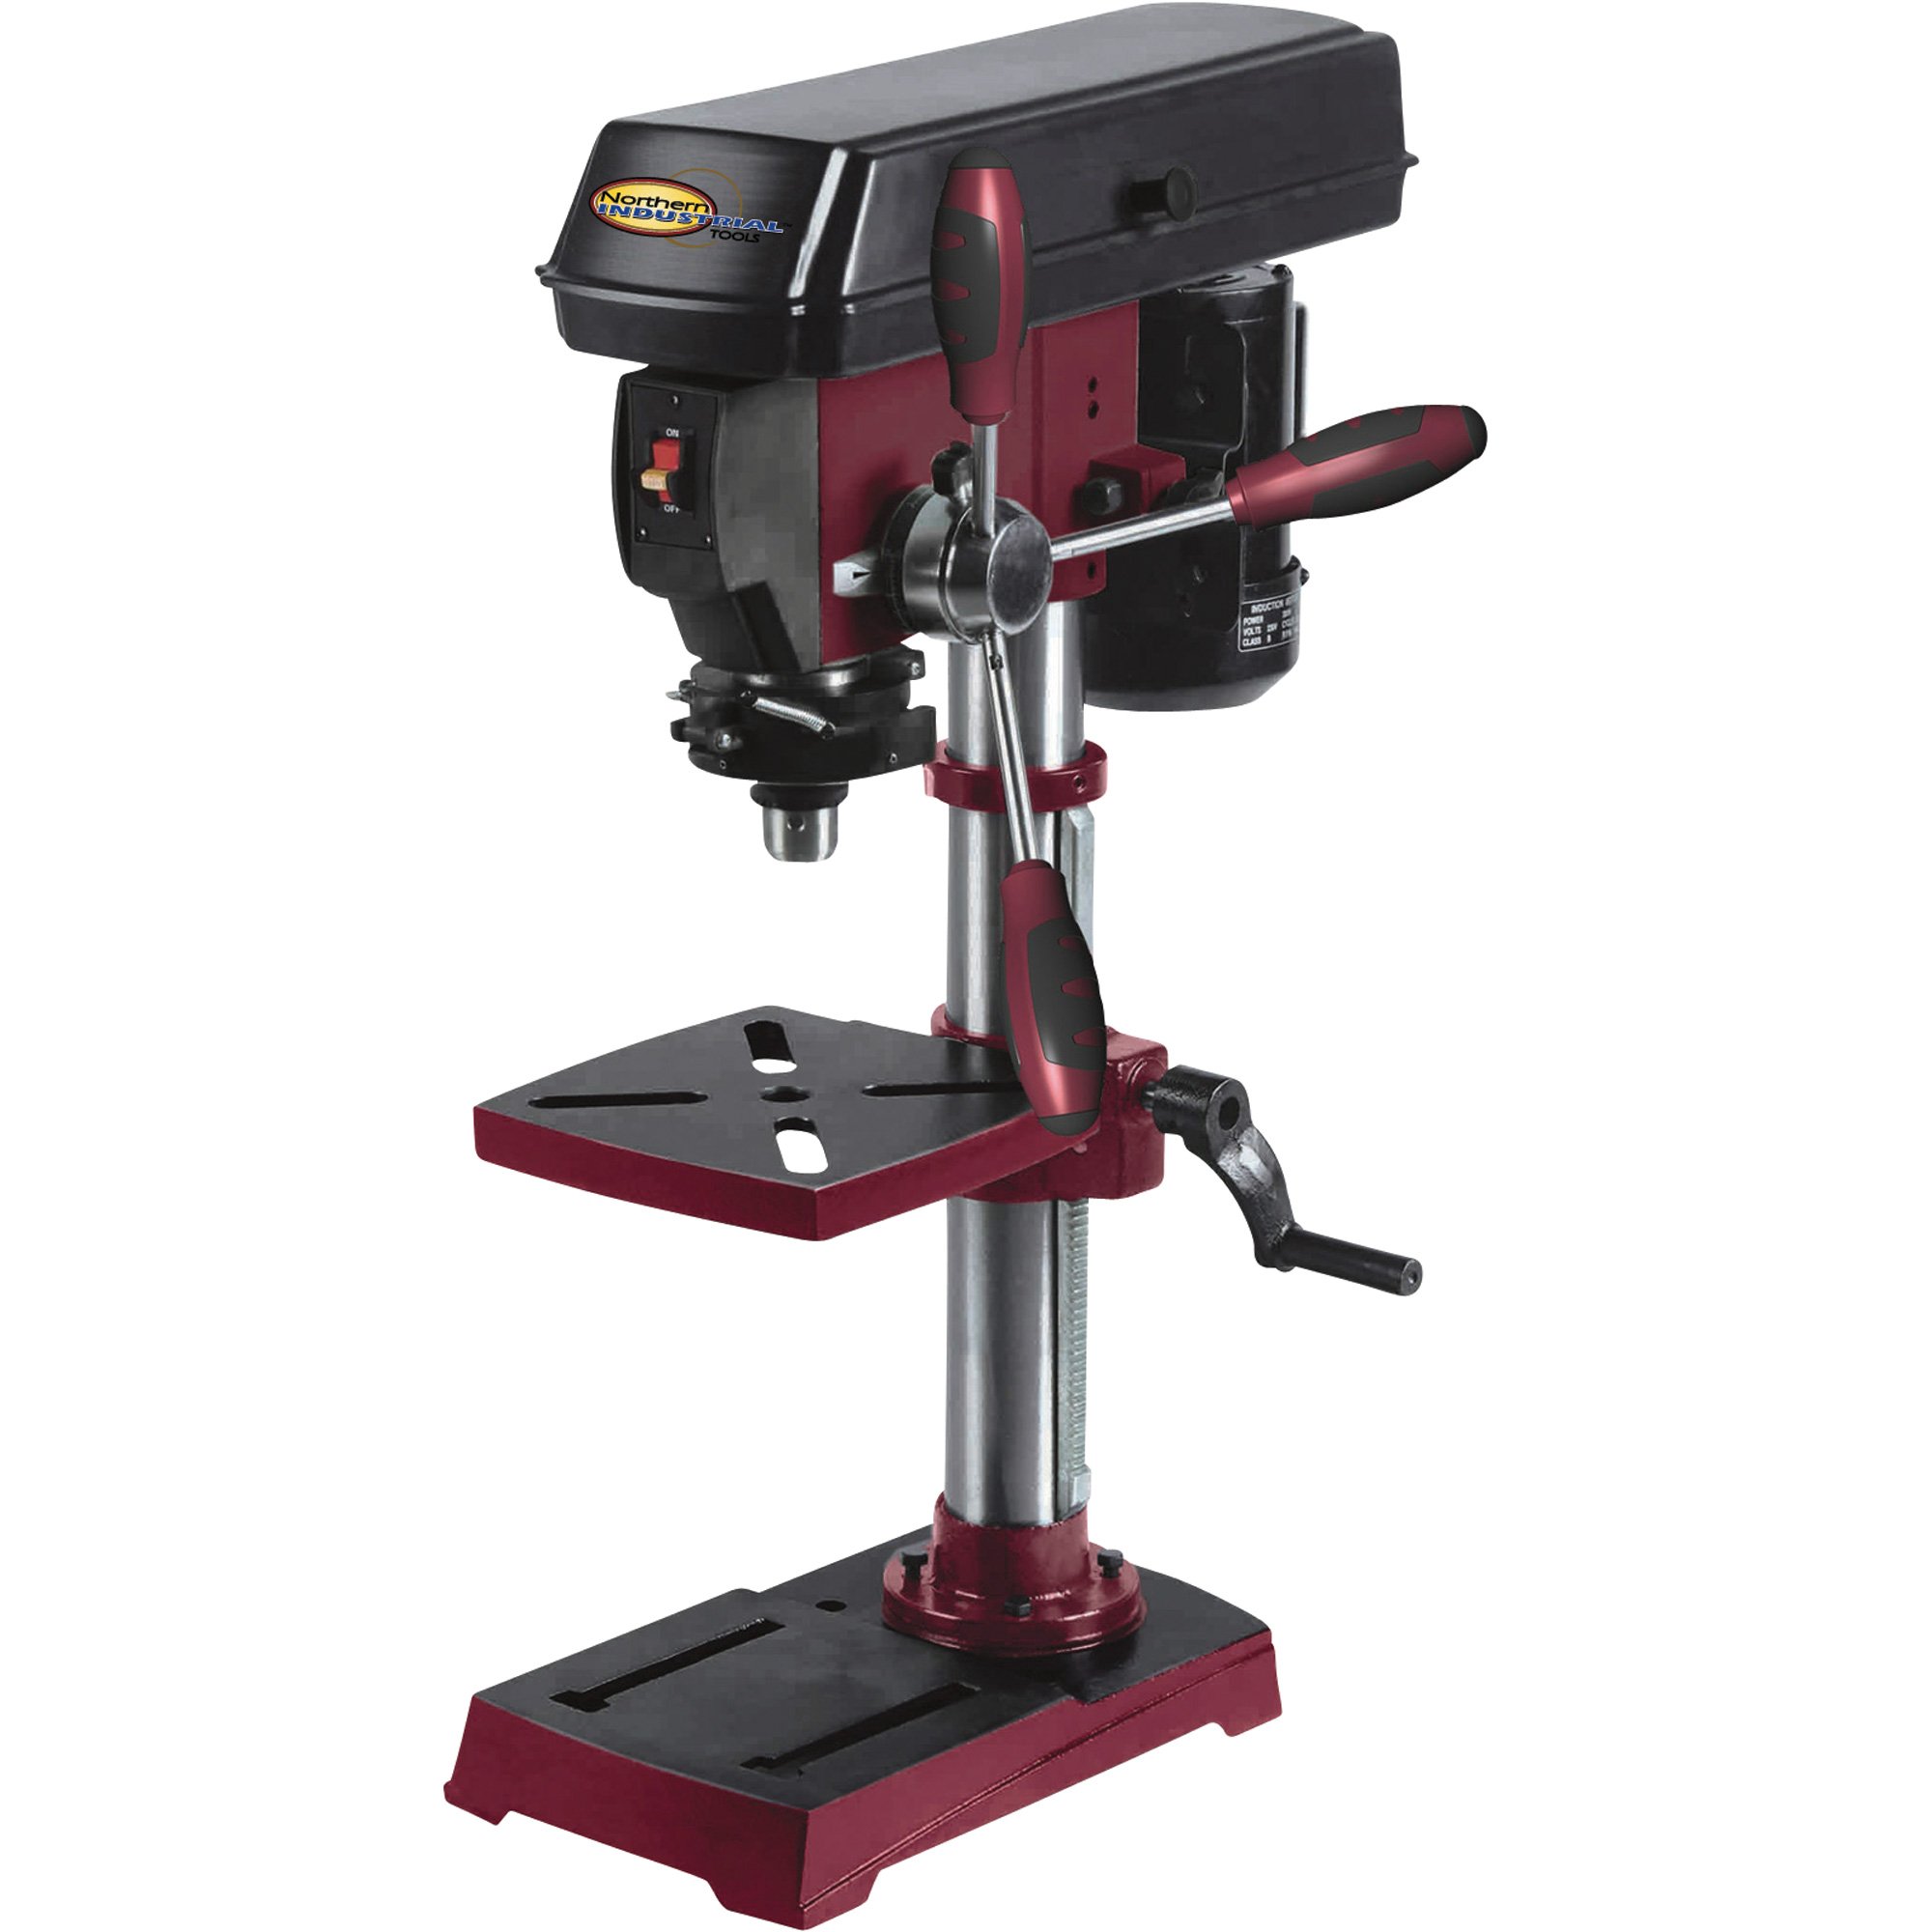 are northern industrial drill press any good? 2